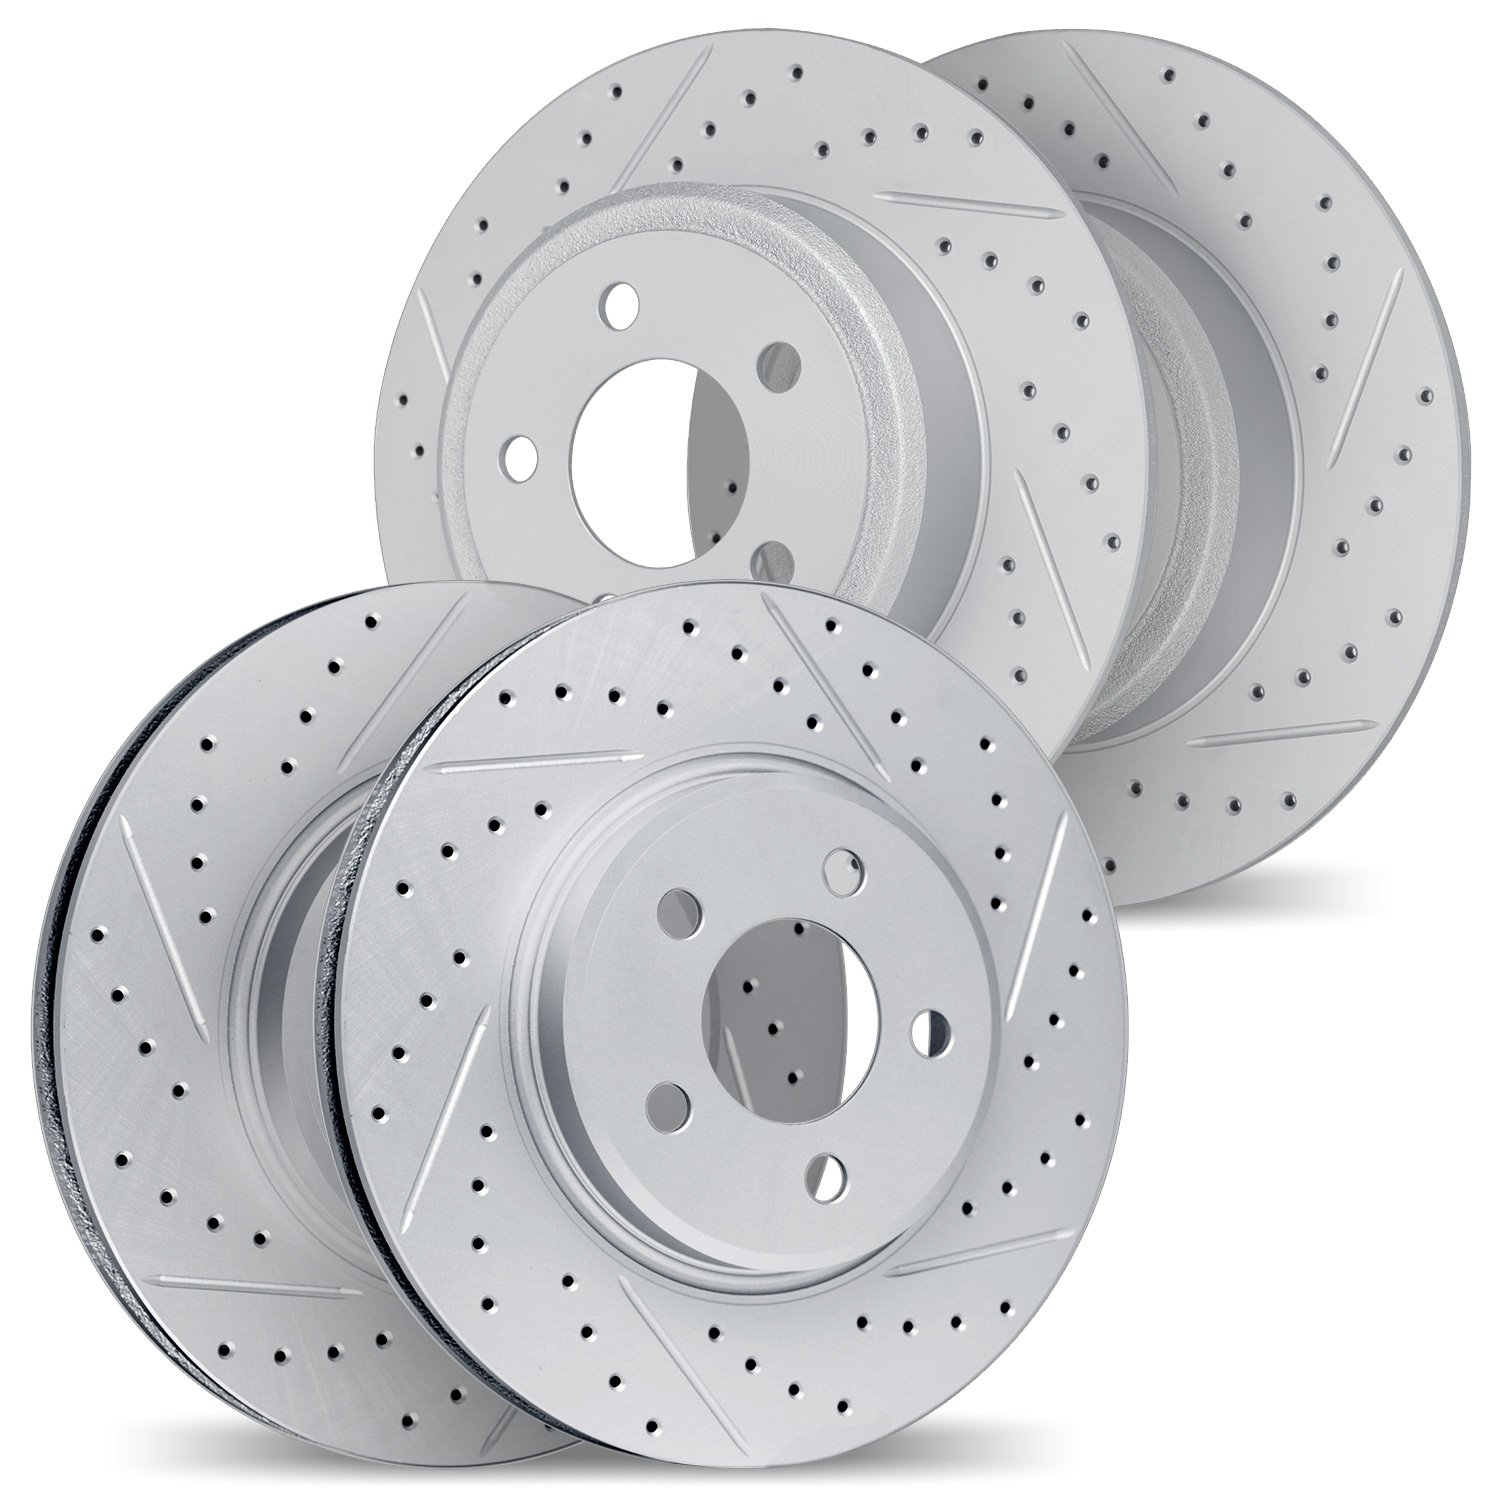 2004-76032 Geoperformance Drilled/Slotted Brake Rotors, 1995-1999 Lexus/Toyota/Scion, Position: Front and Rear